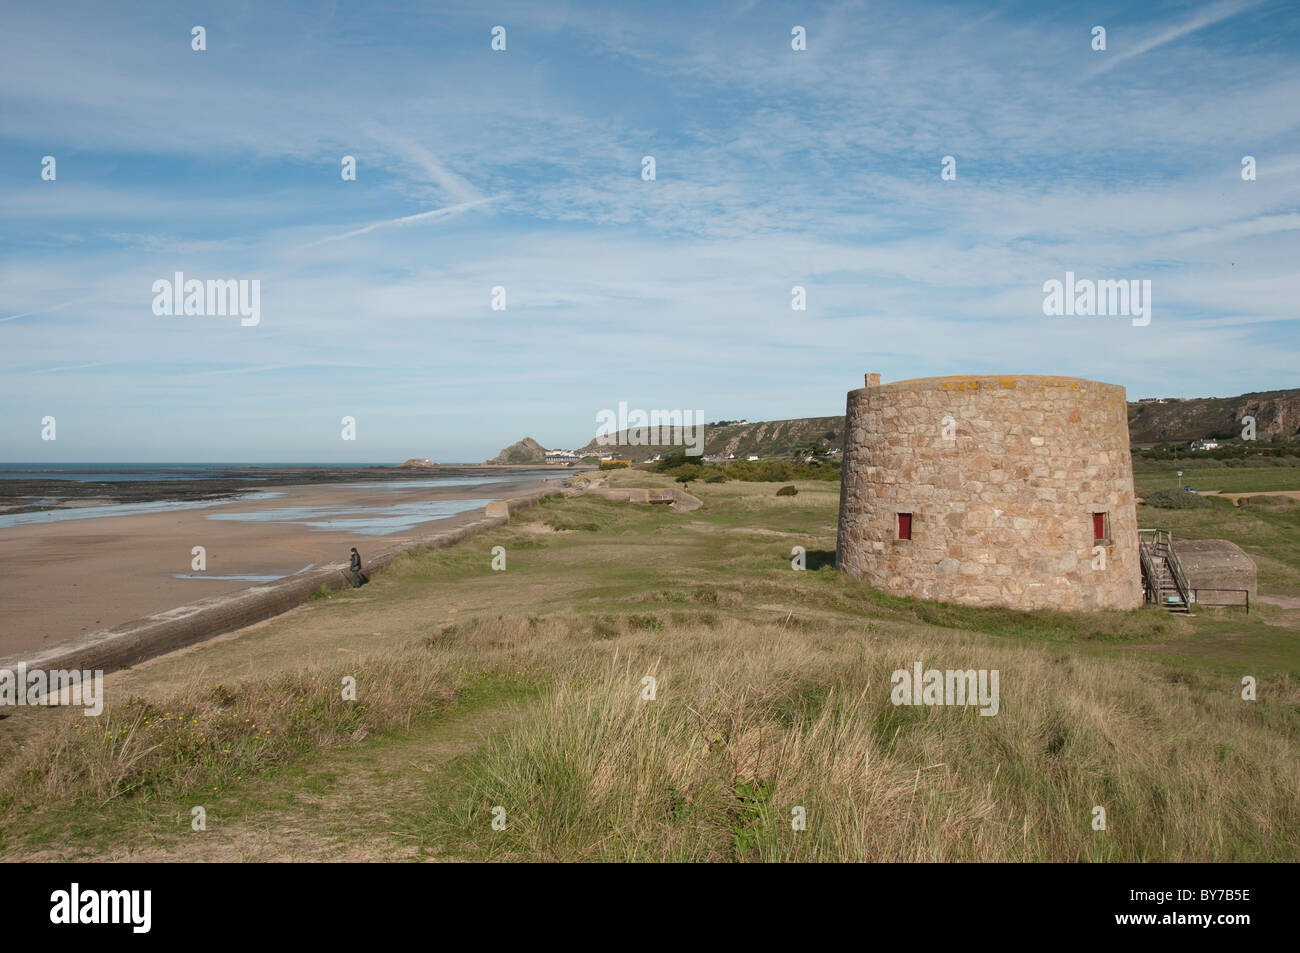 Lewis Tower is one of several fortifications built in St Ouen’s Bay Stock Photo